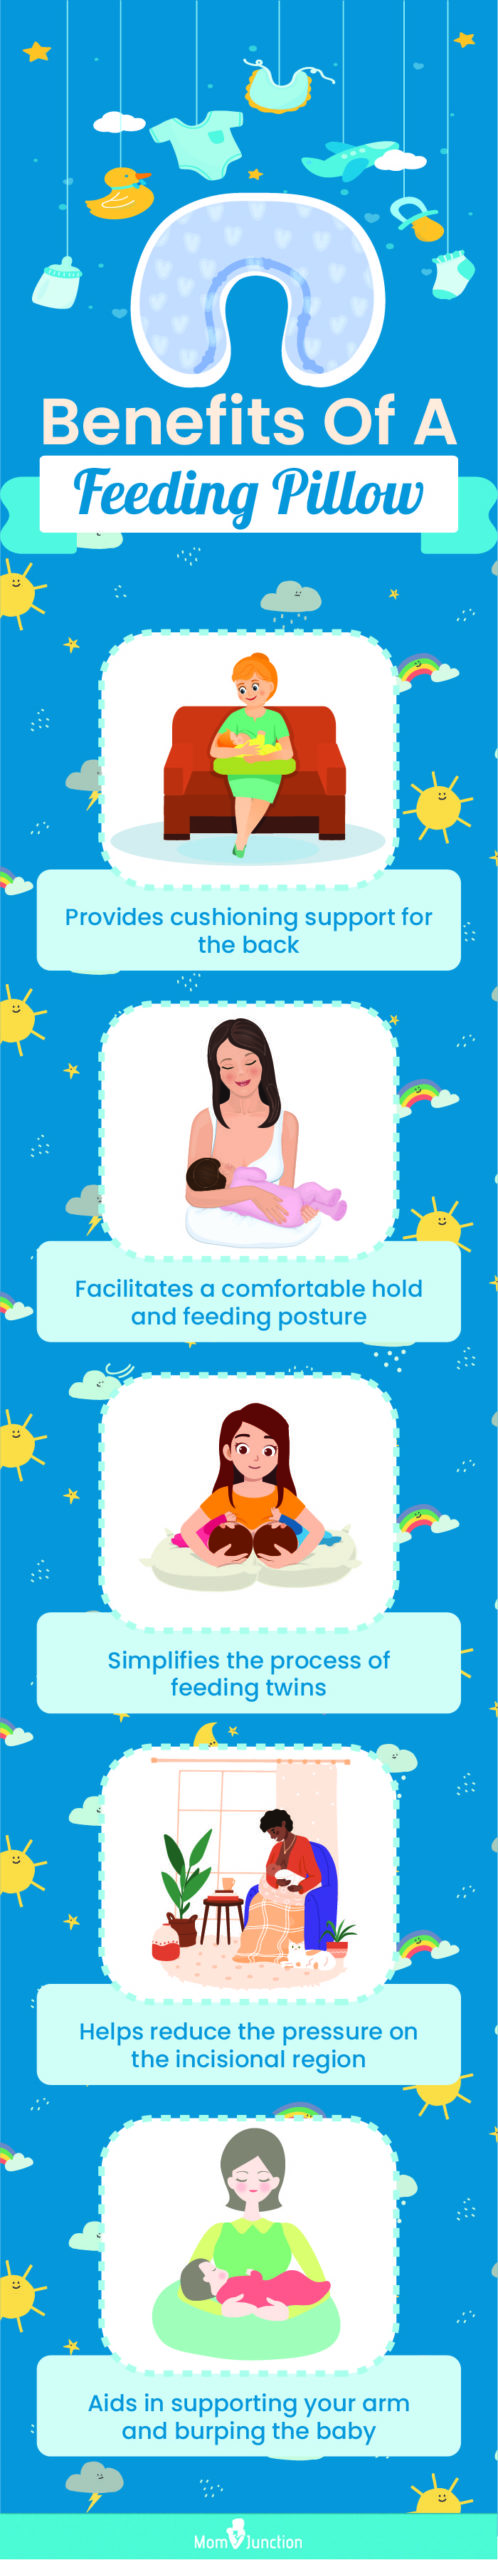 https://www.momjunction.com/wp-content/uploads/2023/01/advantages-of-a-feeding-pillow-scaled.jpg